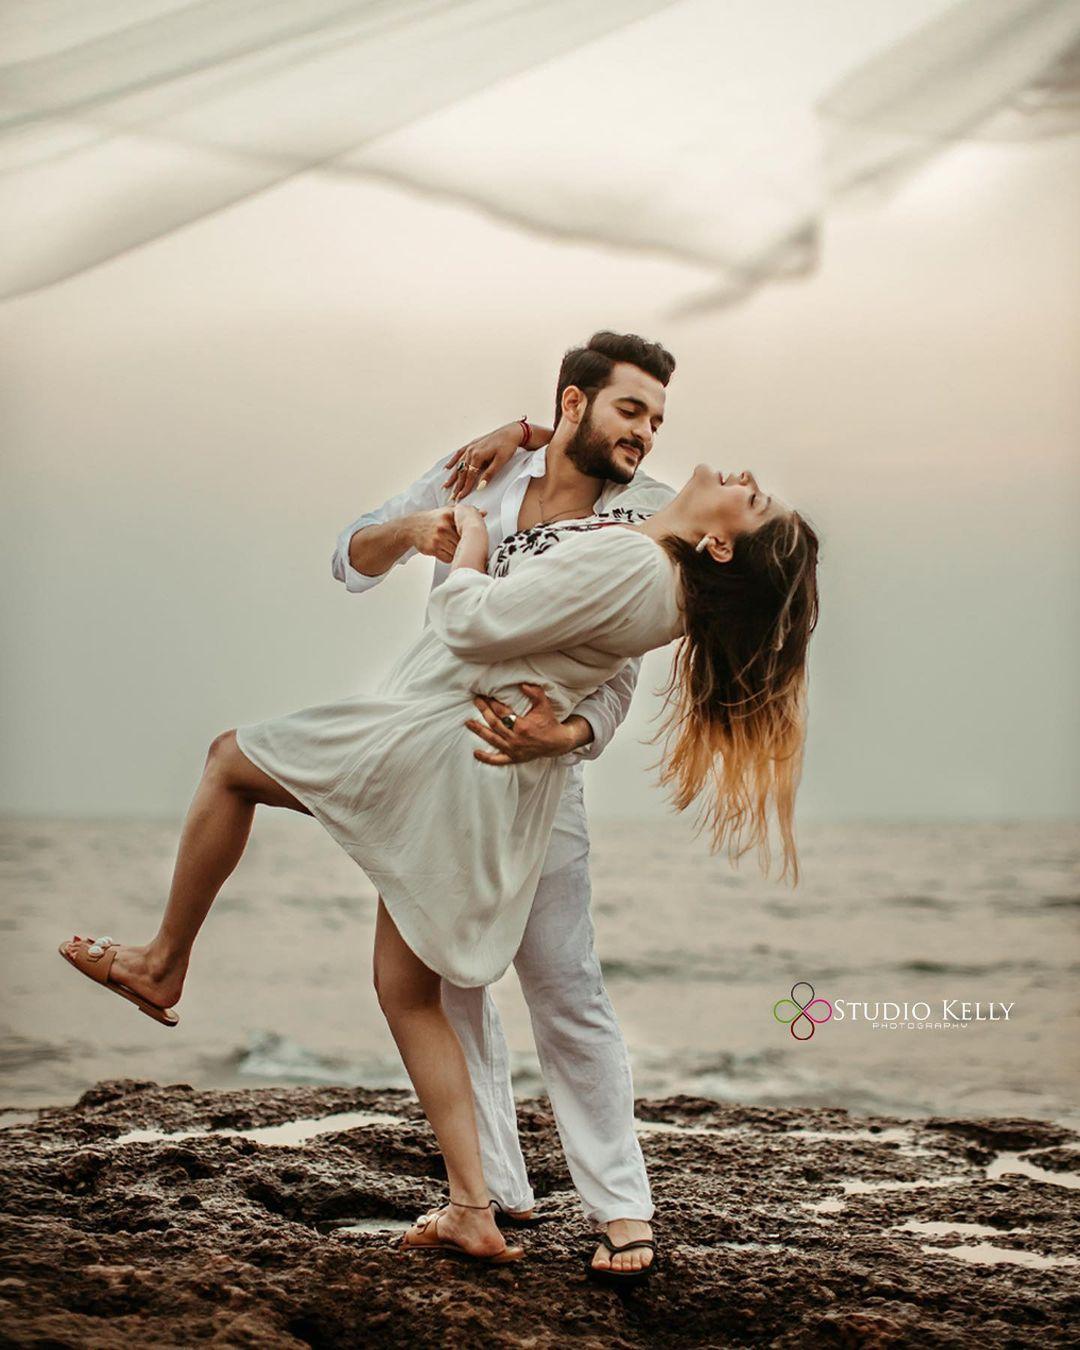 Couple Poses for Pictures  The Complete Posing Guide  Bidun Art